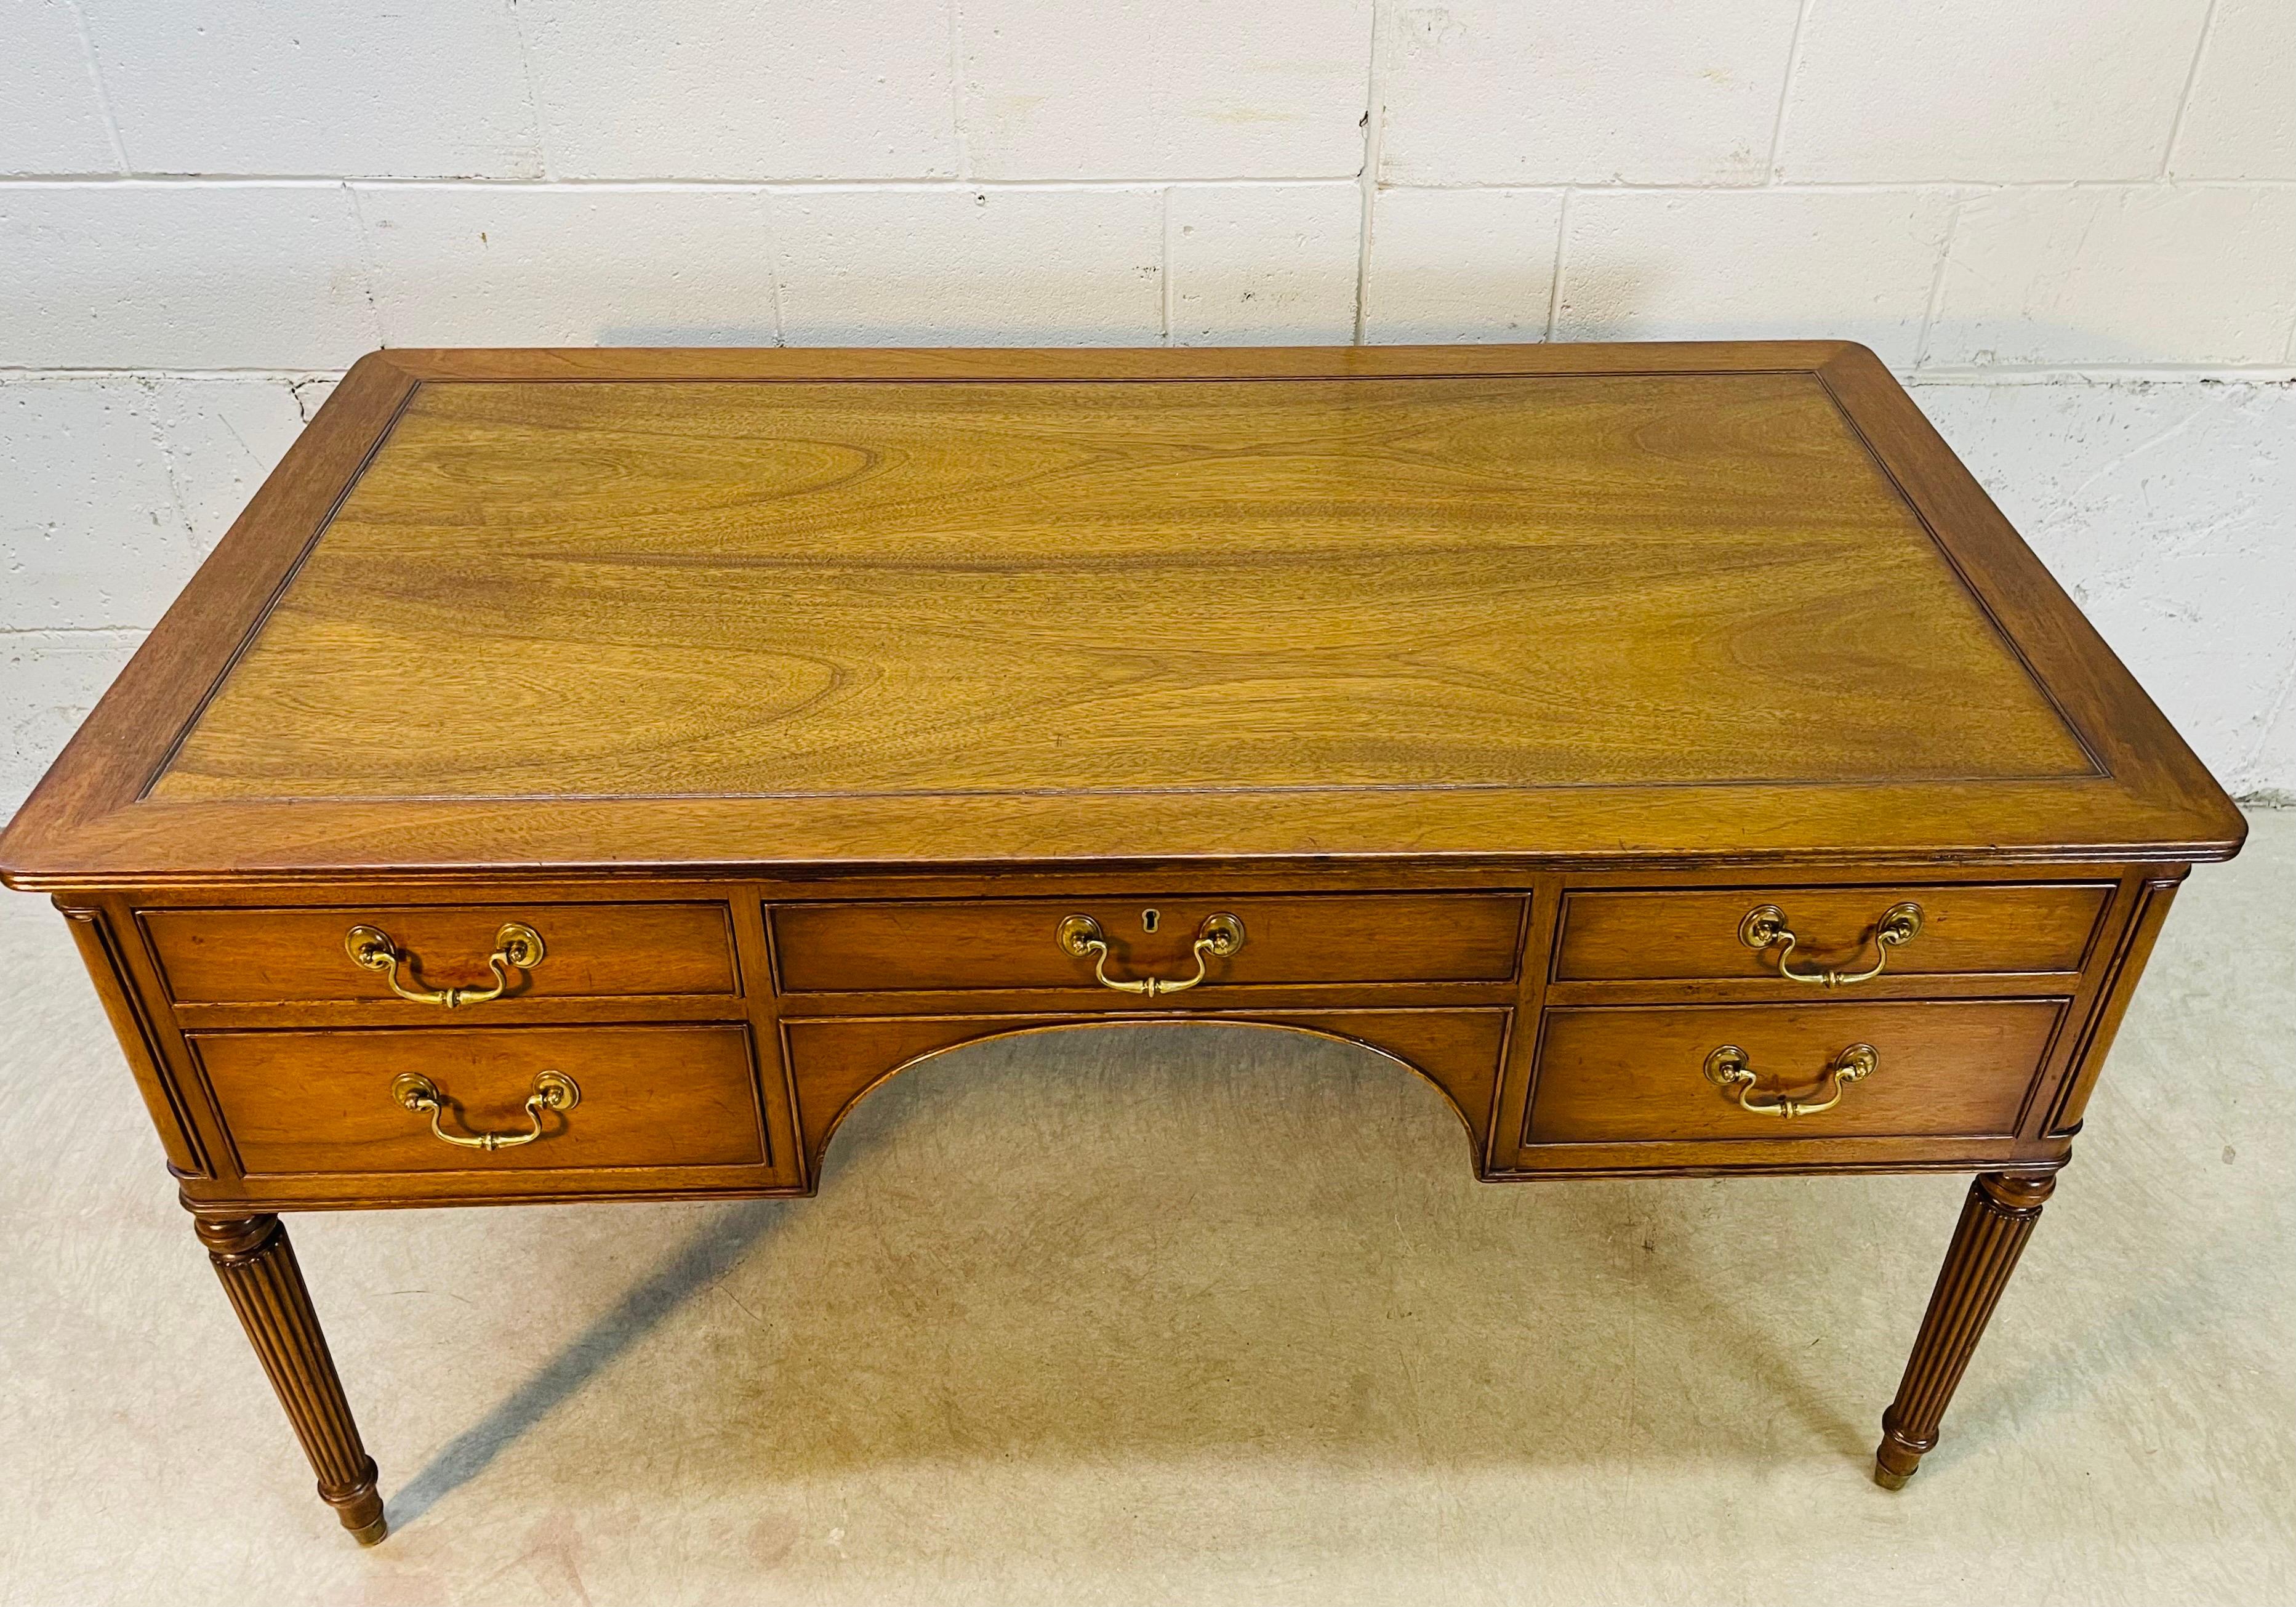 Vintage 1940s Neoclassical English Sheraton style mahogany desk by Kittinger. The desk has five drawers for storage. The pulls are solid brass and the legs are a tapered column style. The wood is solid and in excellent refinished condition. The knee